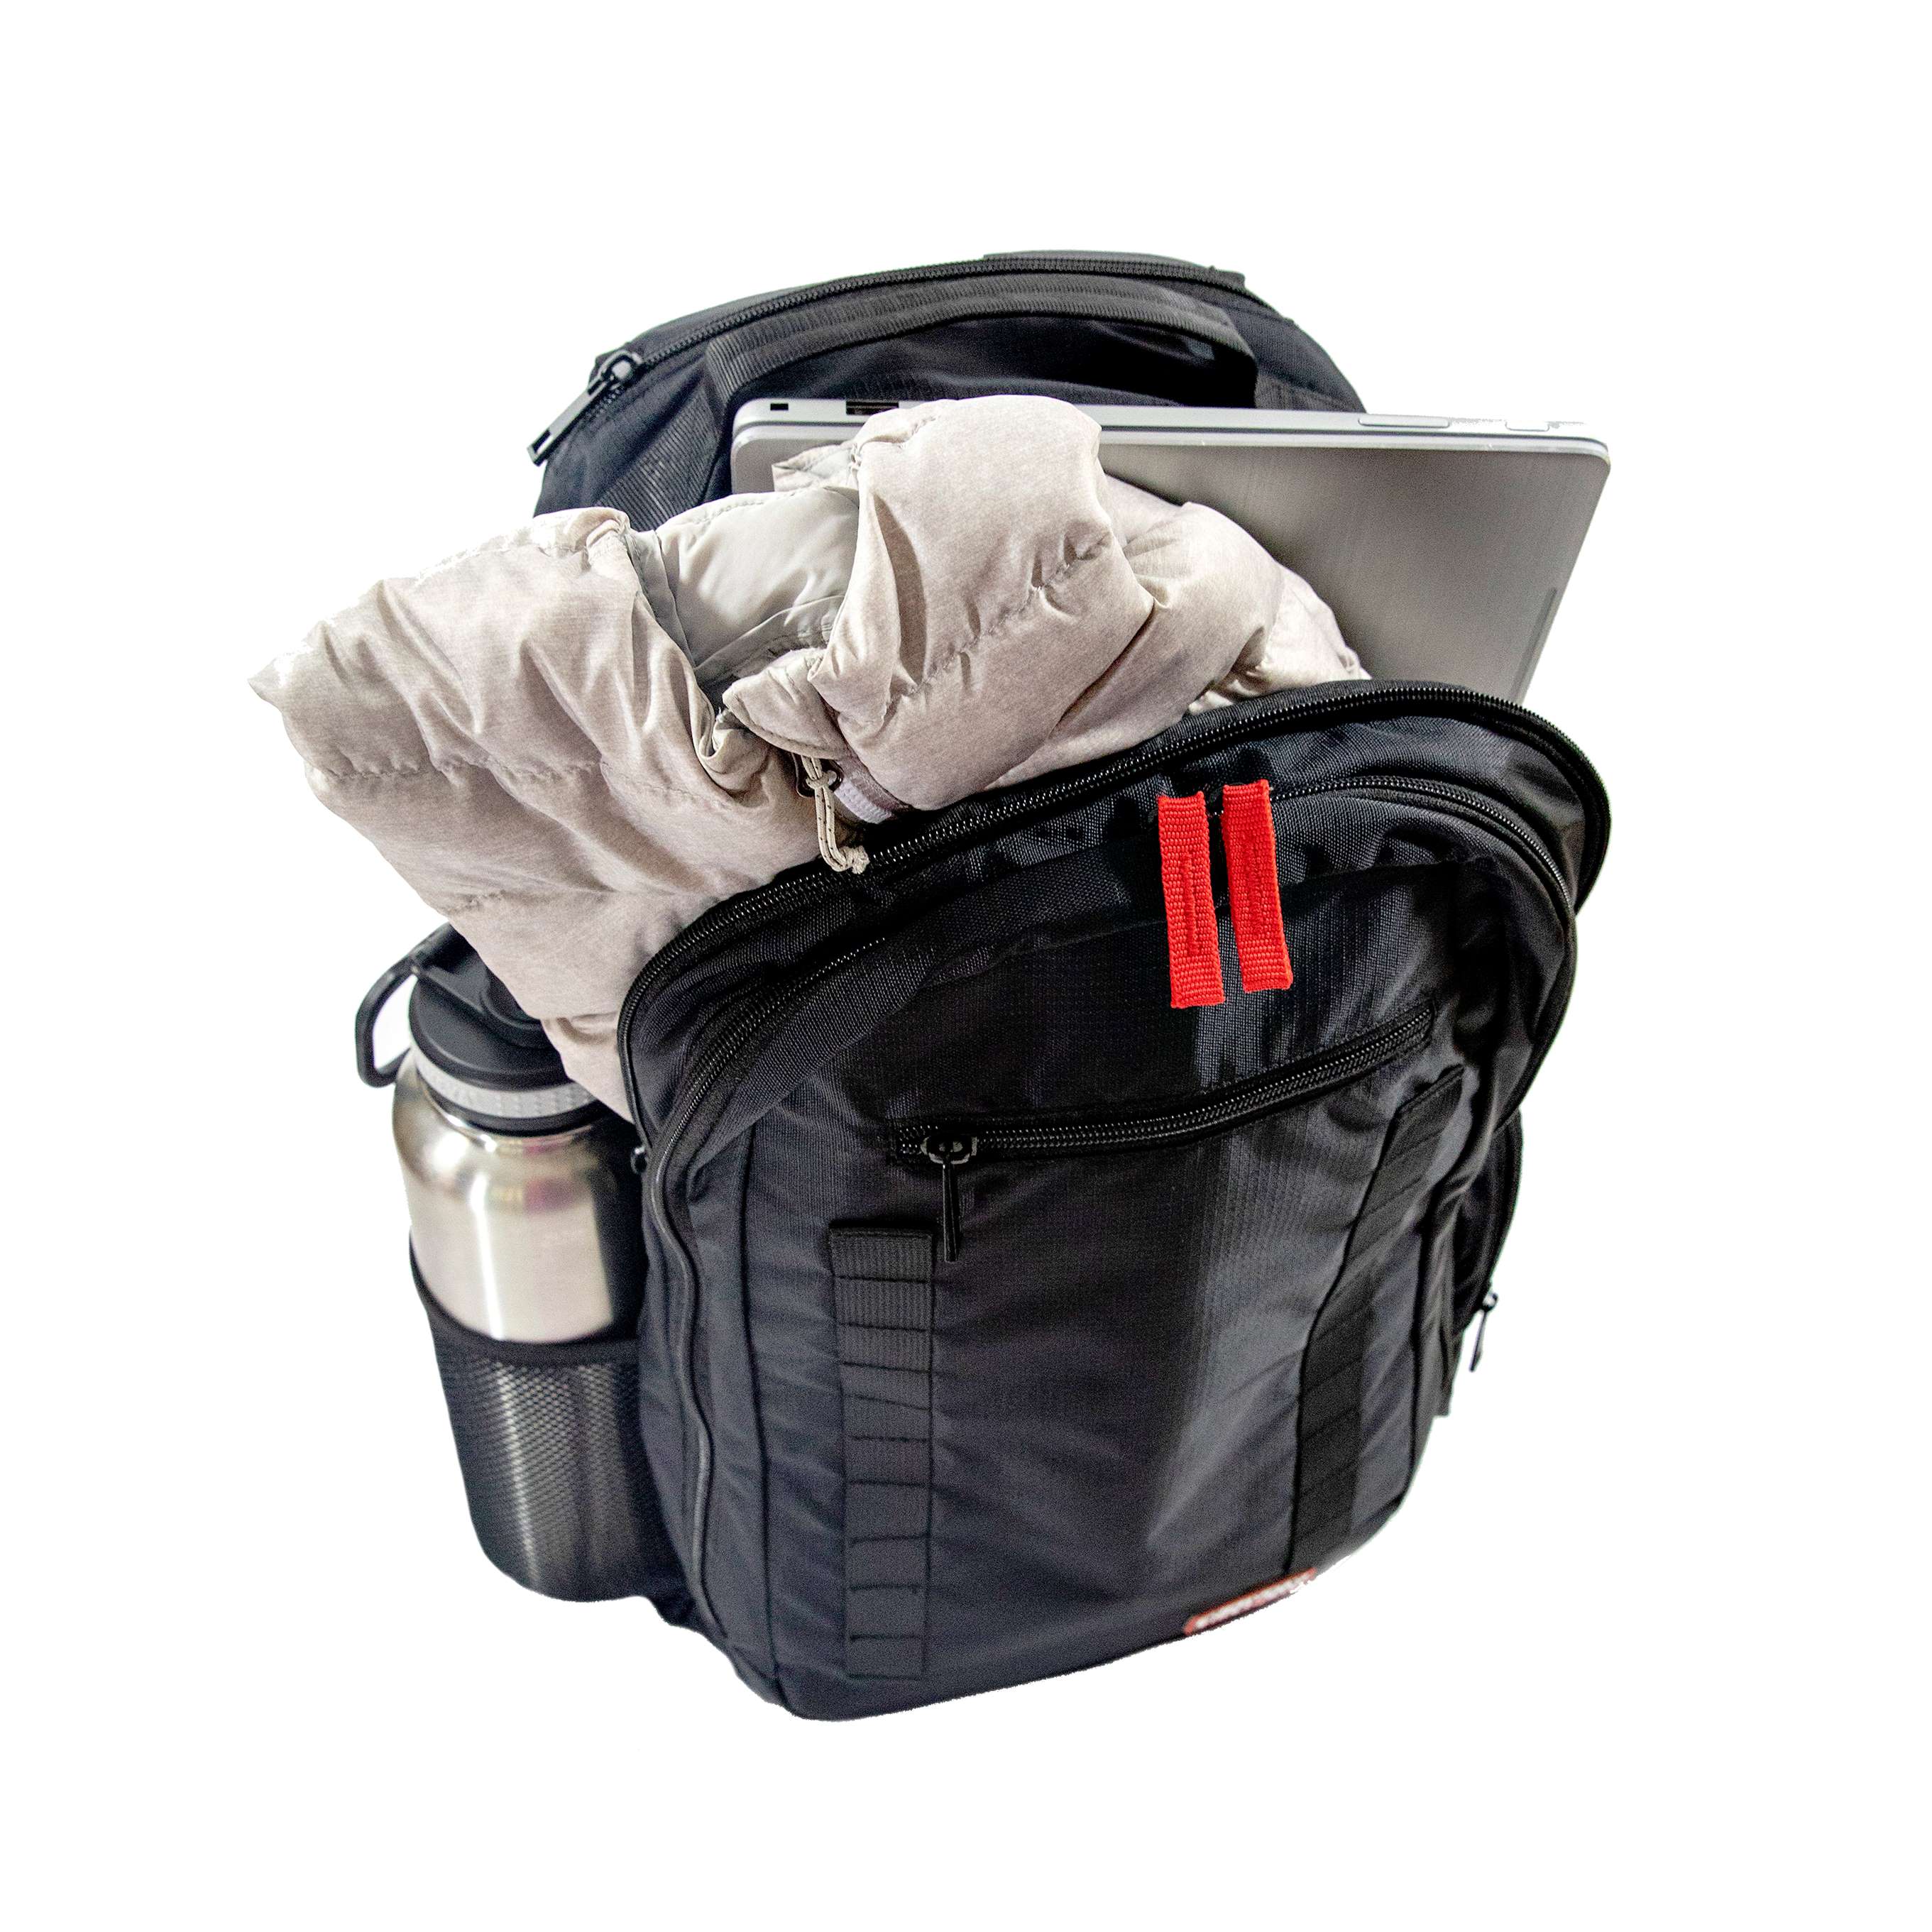 Advanced first aid kit backpack with white coat and computer